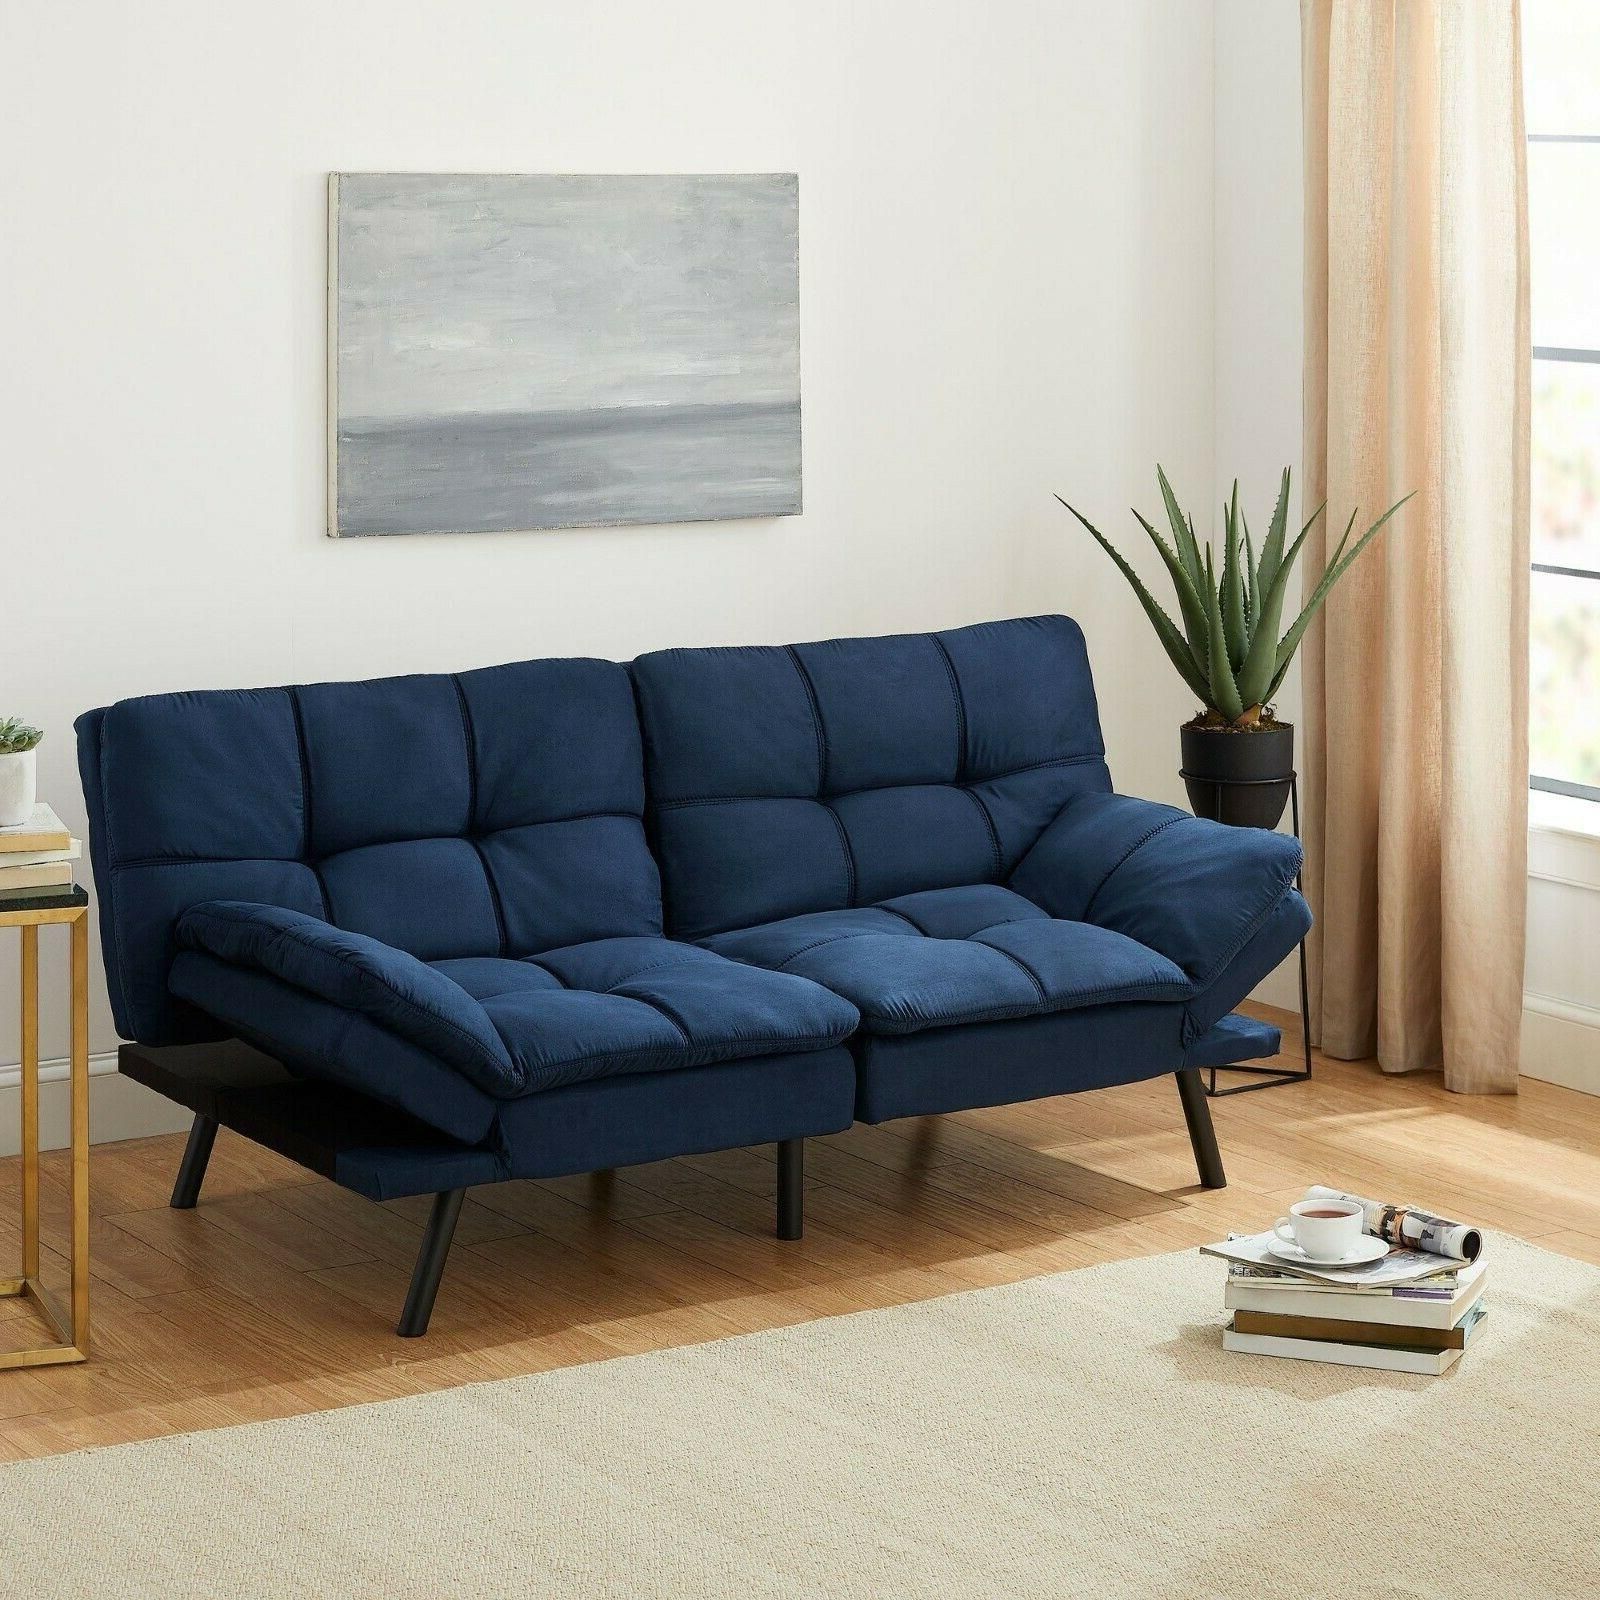 New – Mainstays Memory Foam Futon, Gray Faux With Regard To Black Faux Suede Memory Foam Sofas (View 13 of 20)